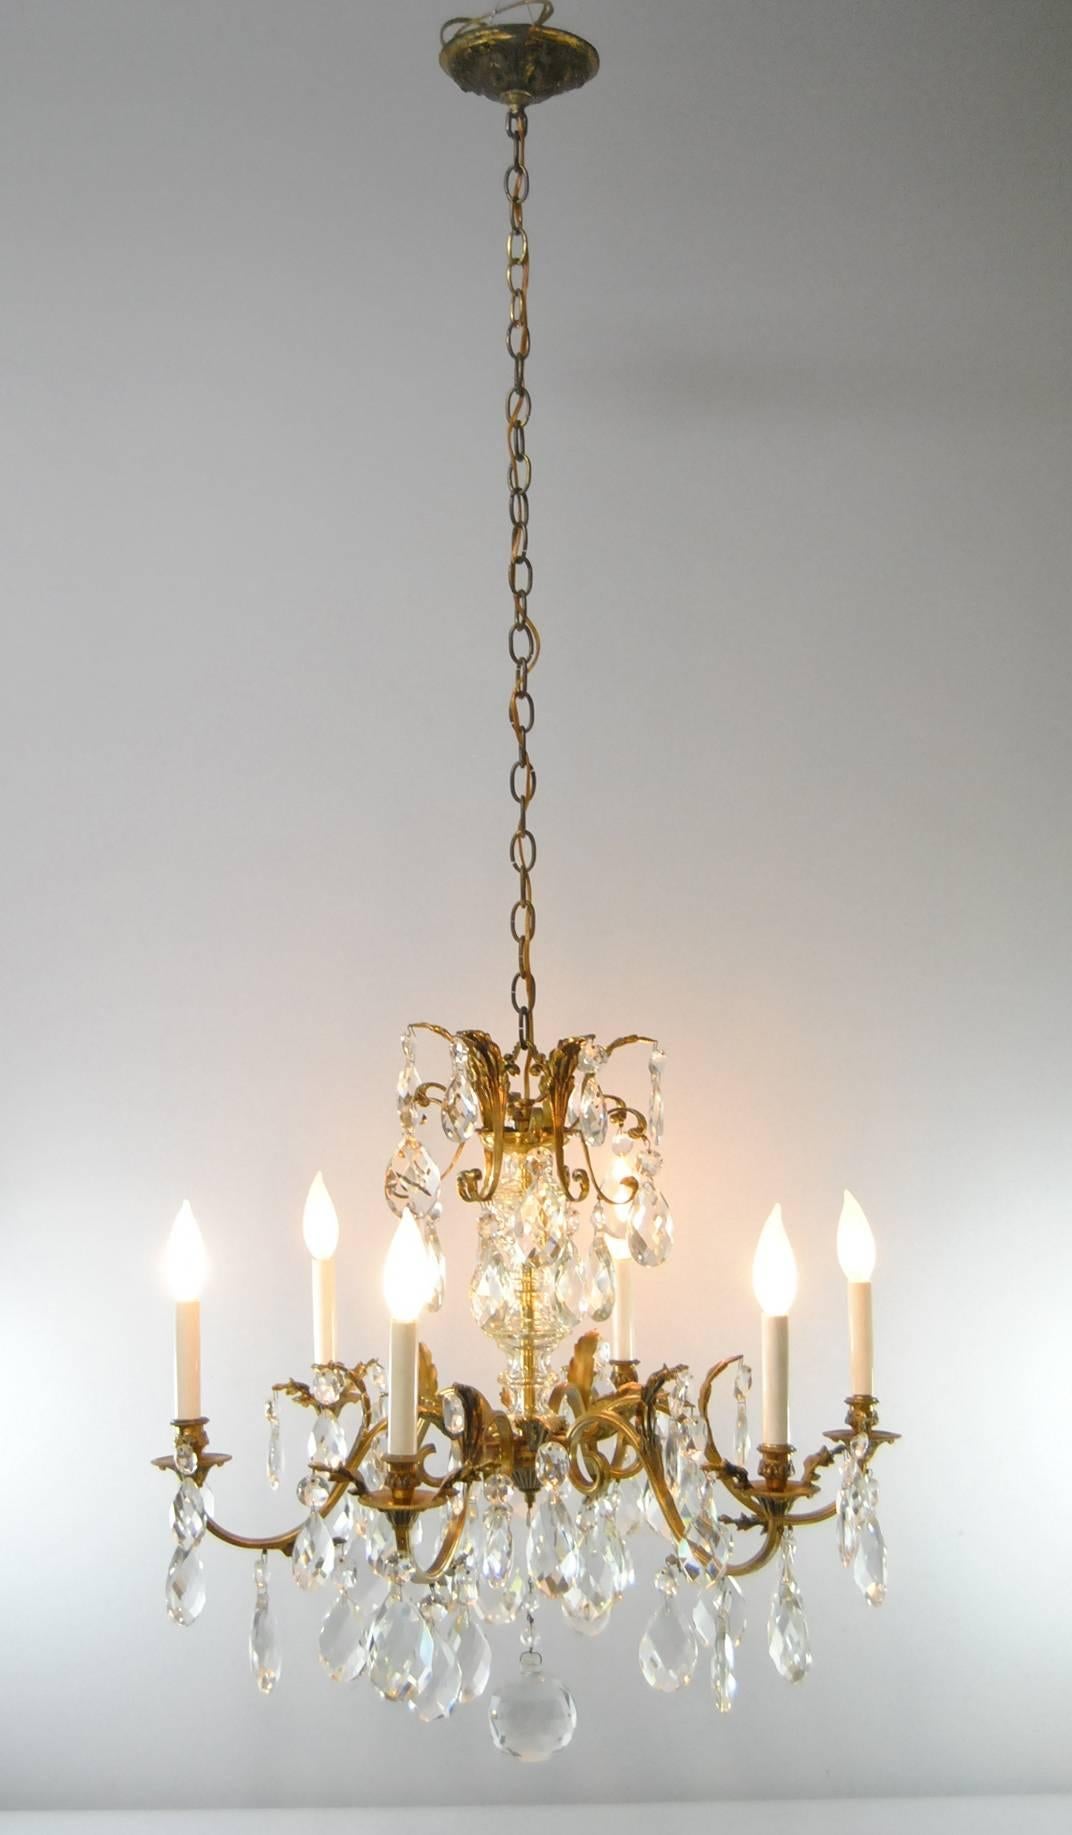 20th Century French Bronze Crystal Chandelier with Six Arms